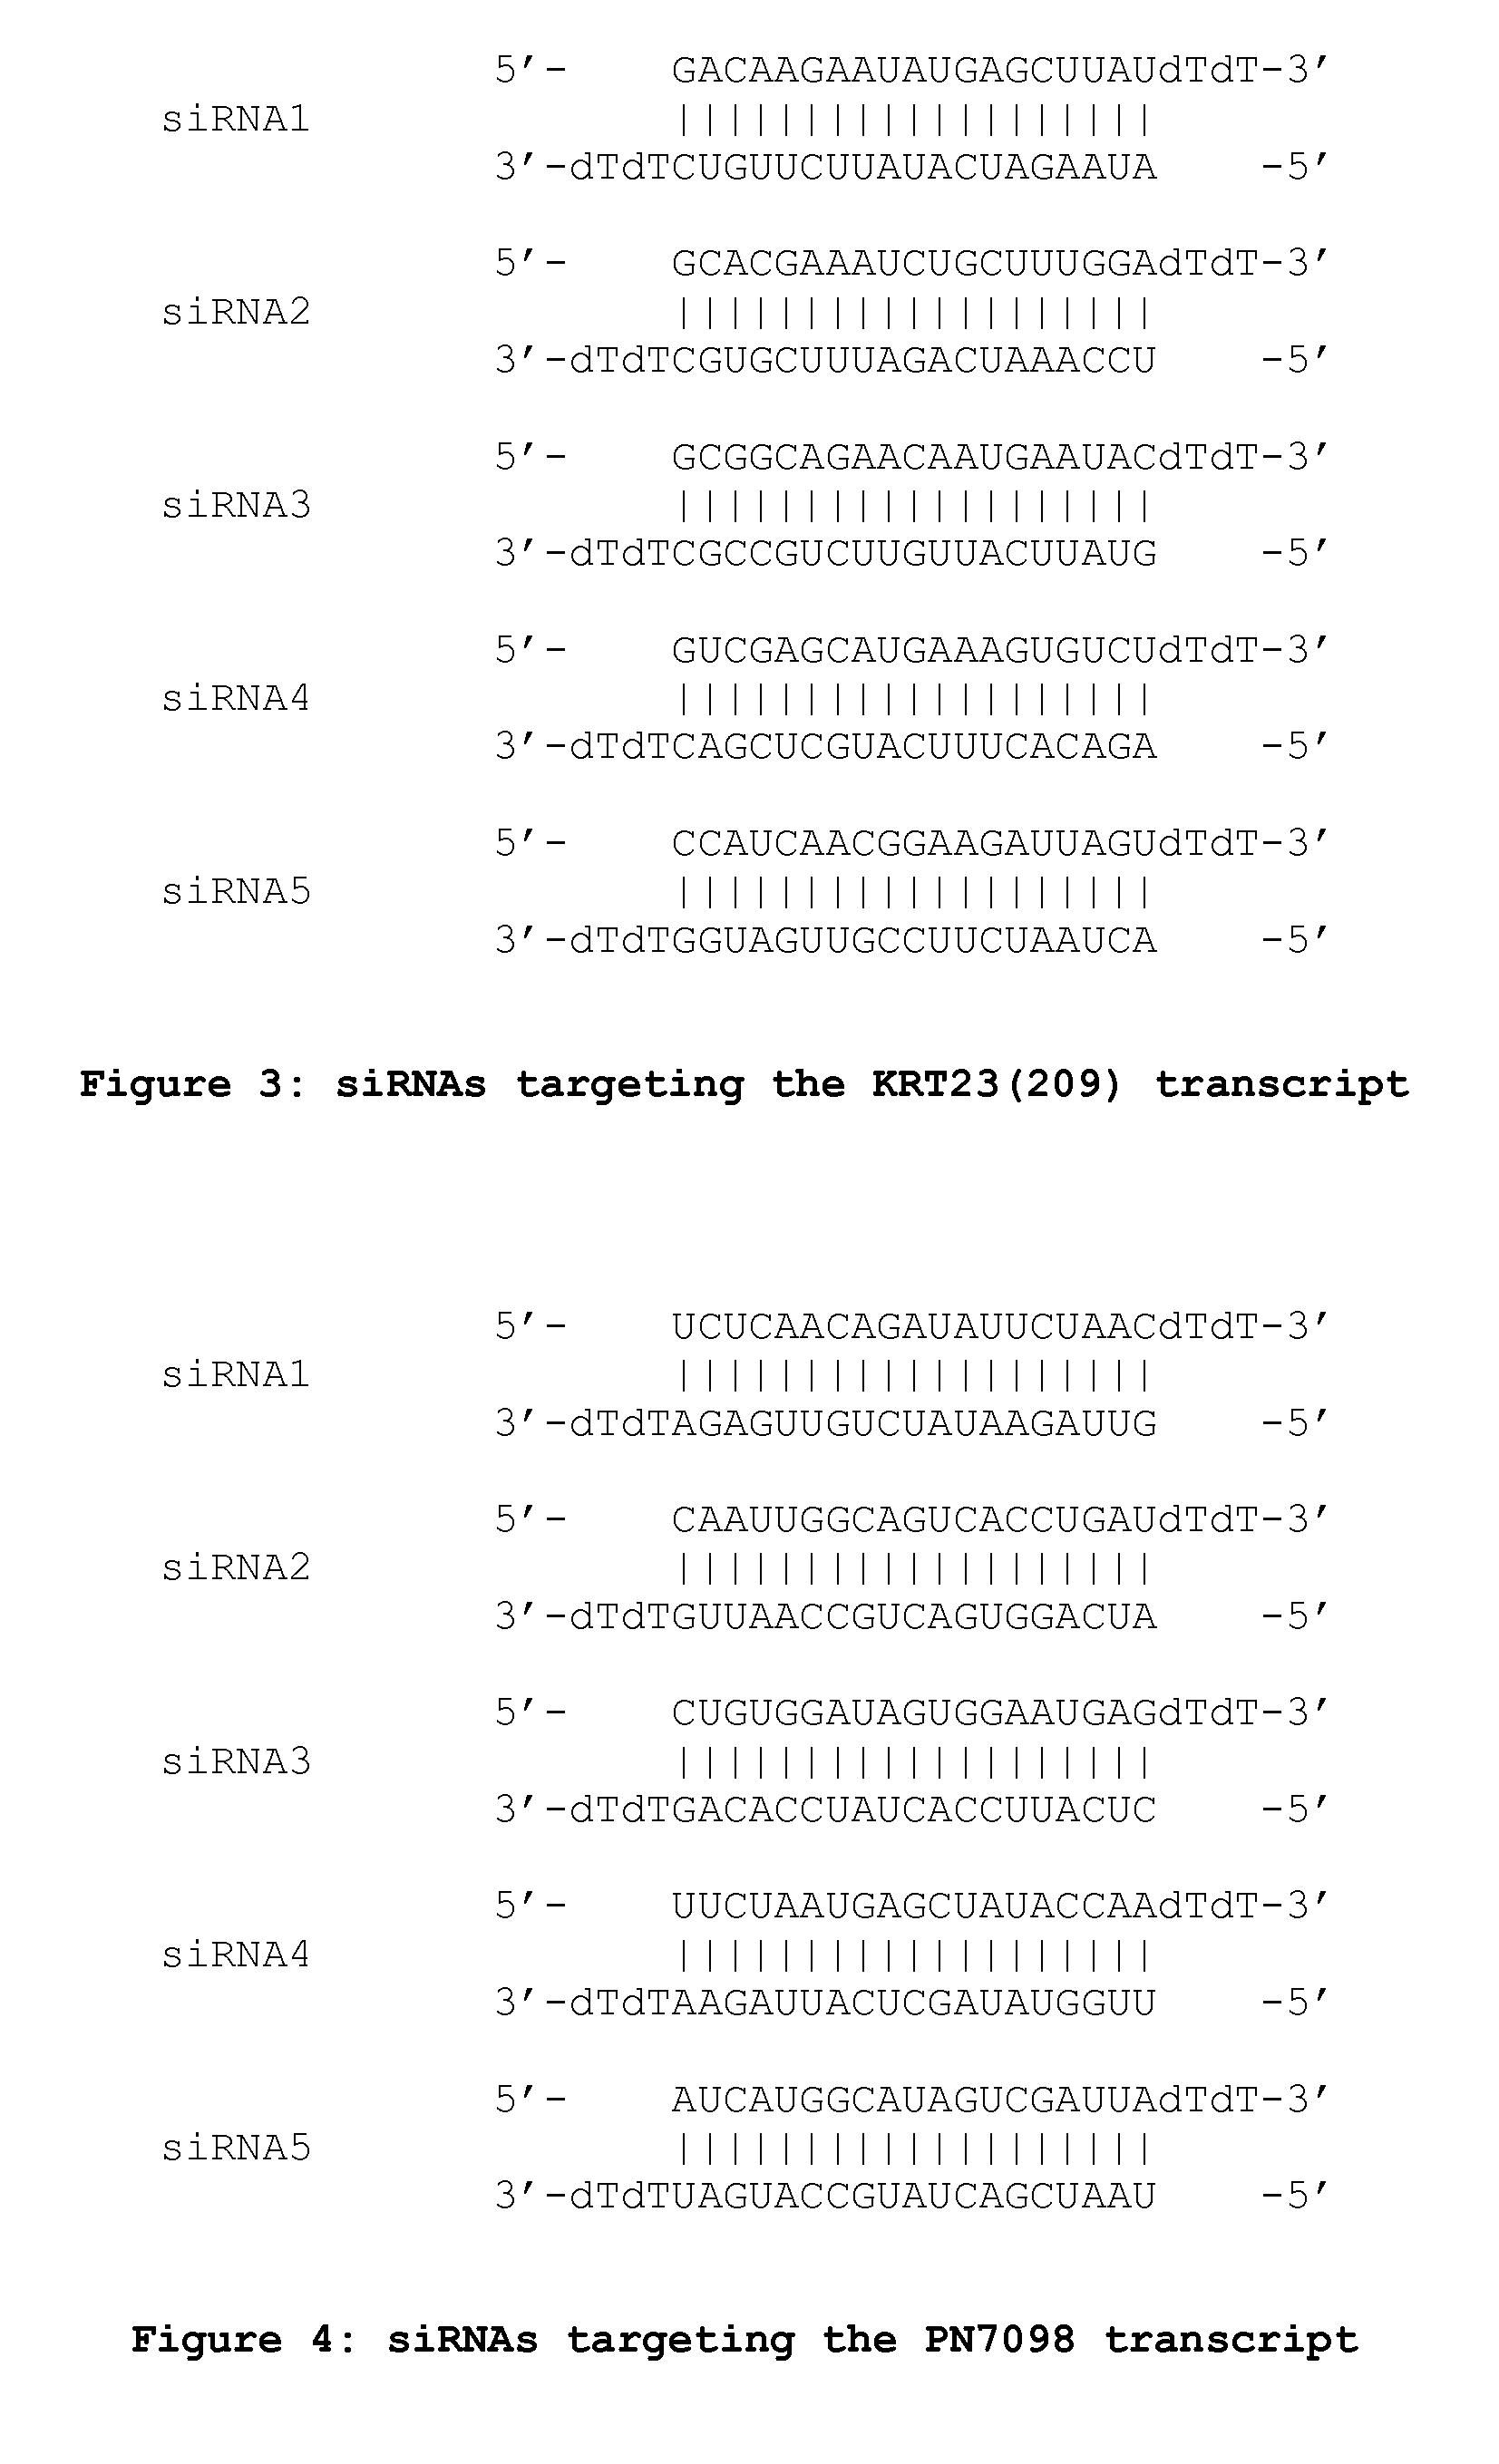 Compositions and methods for treating inflammatory disorders